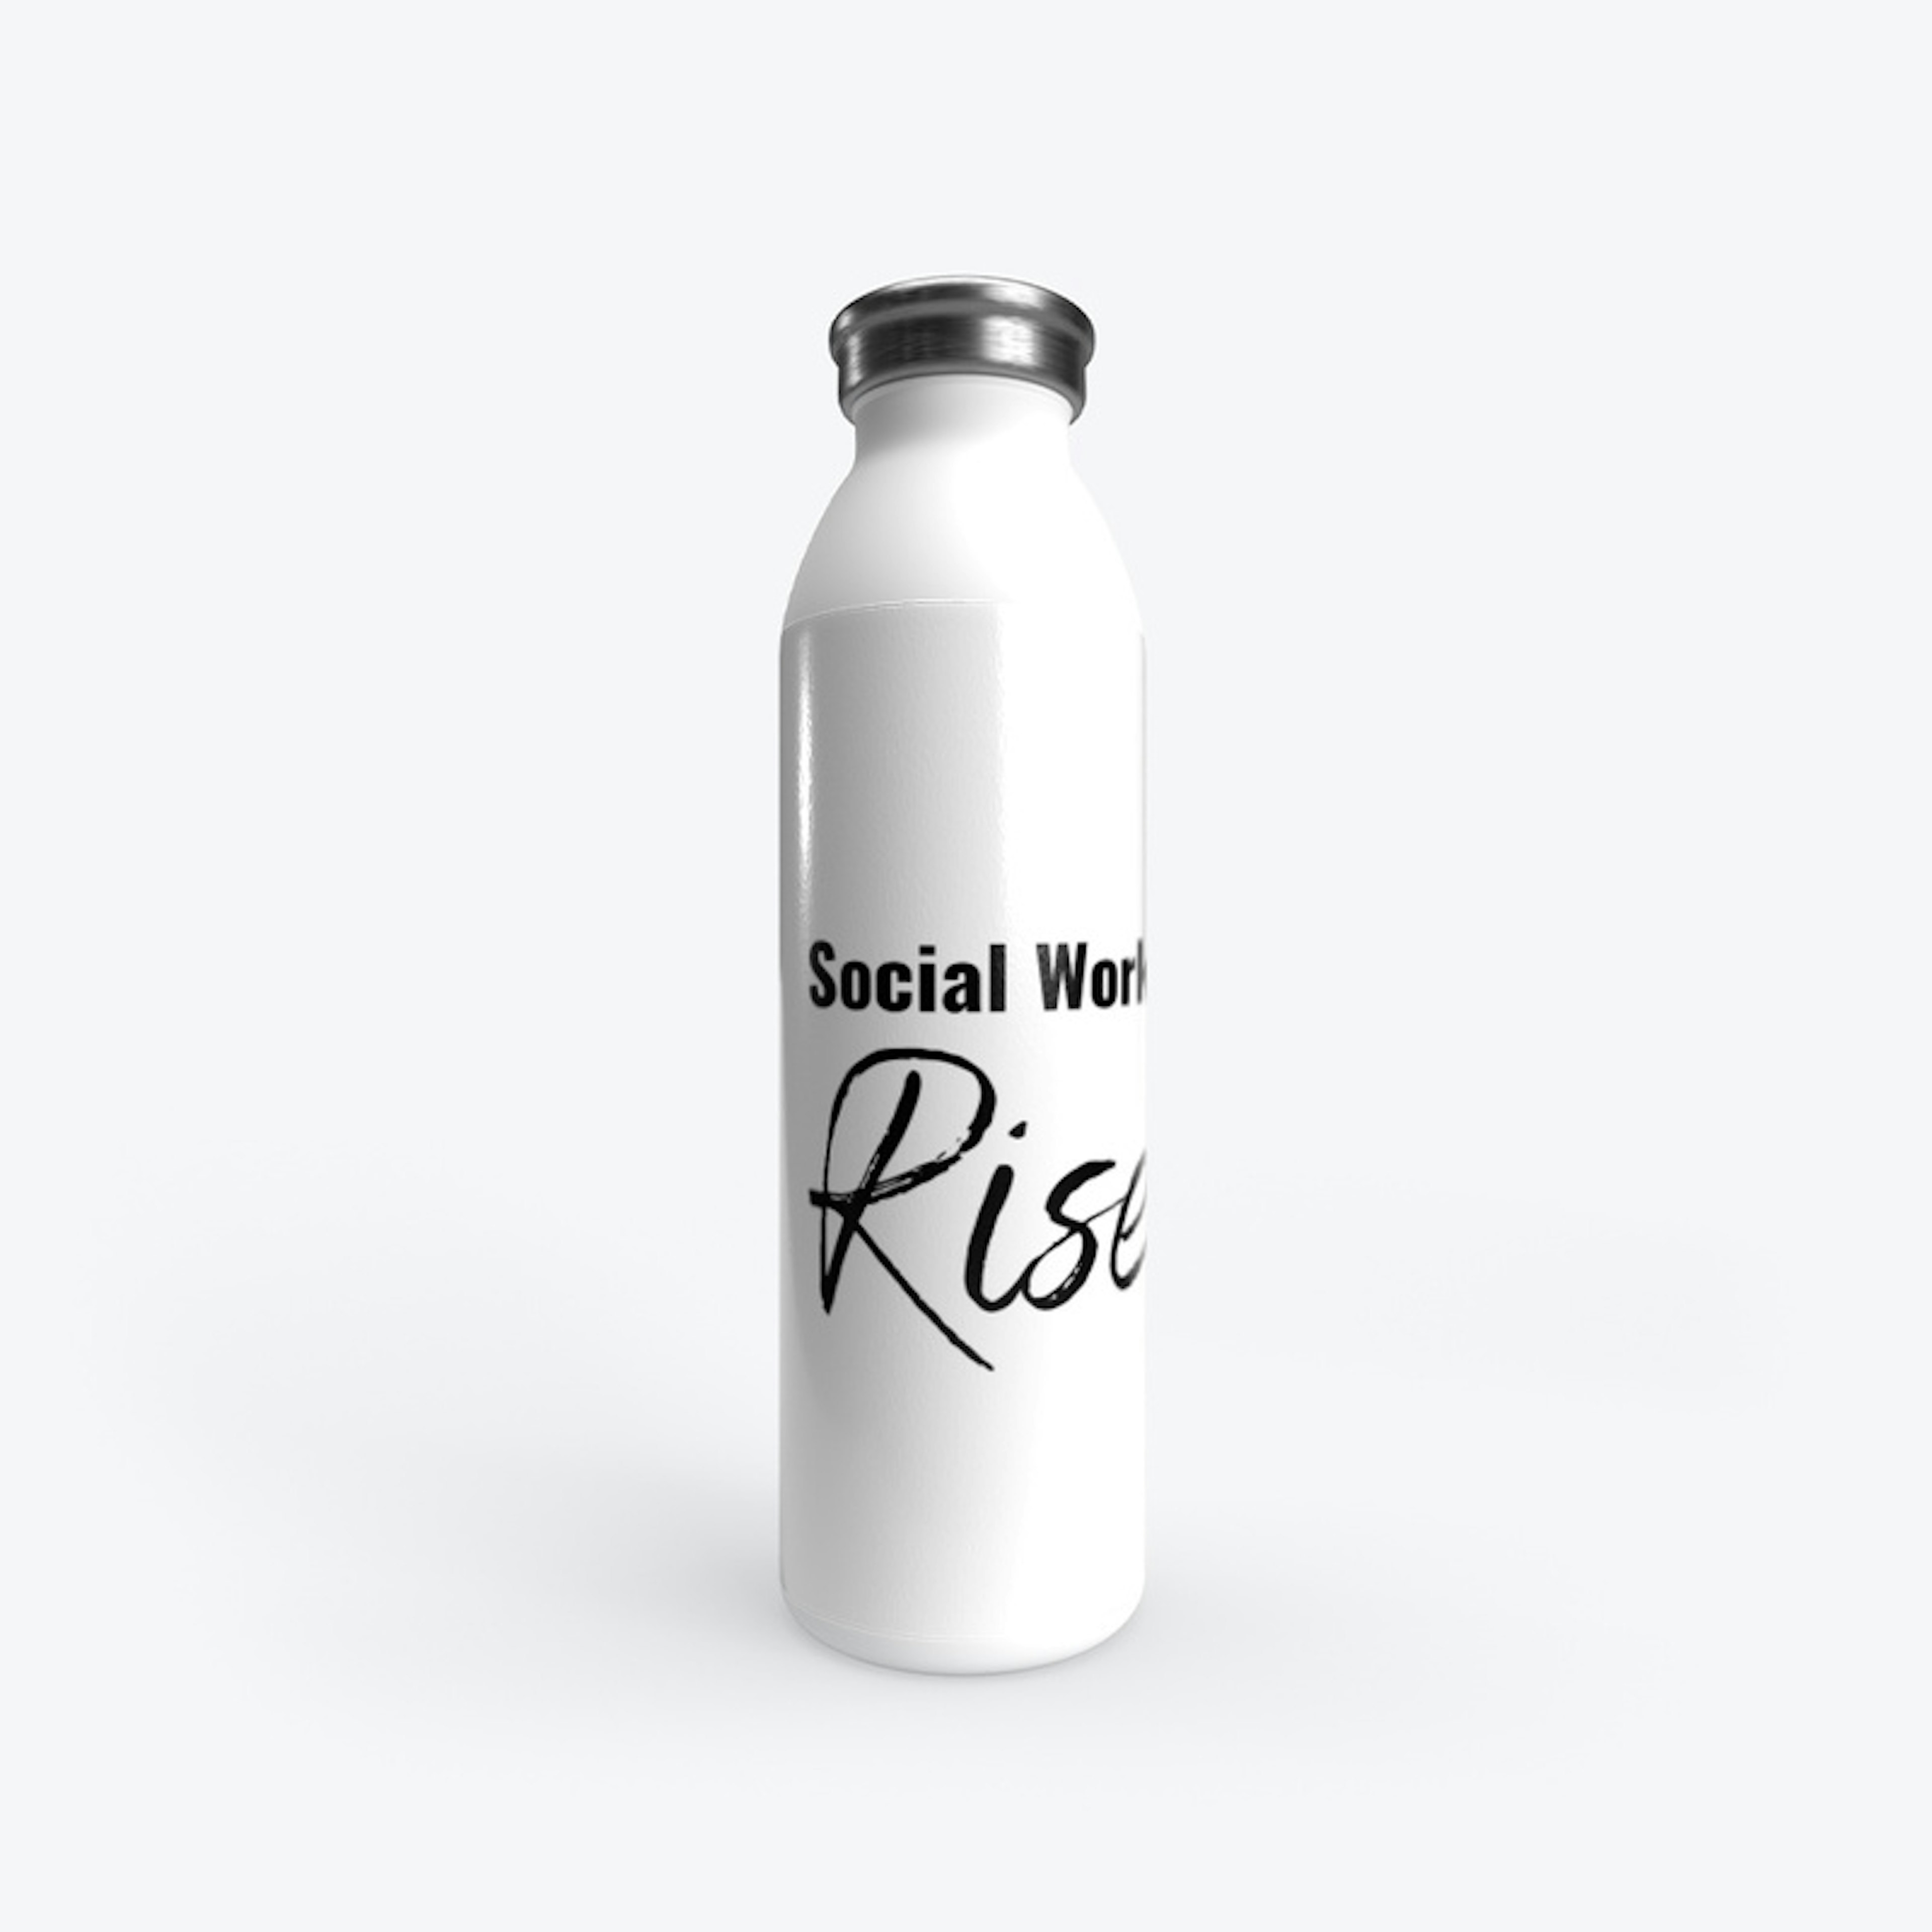 Social Workers, Rise!